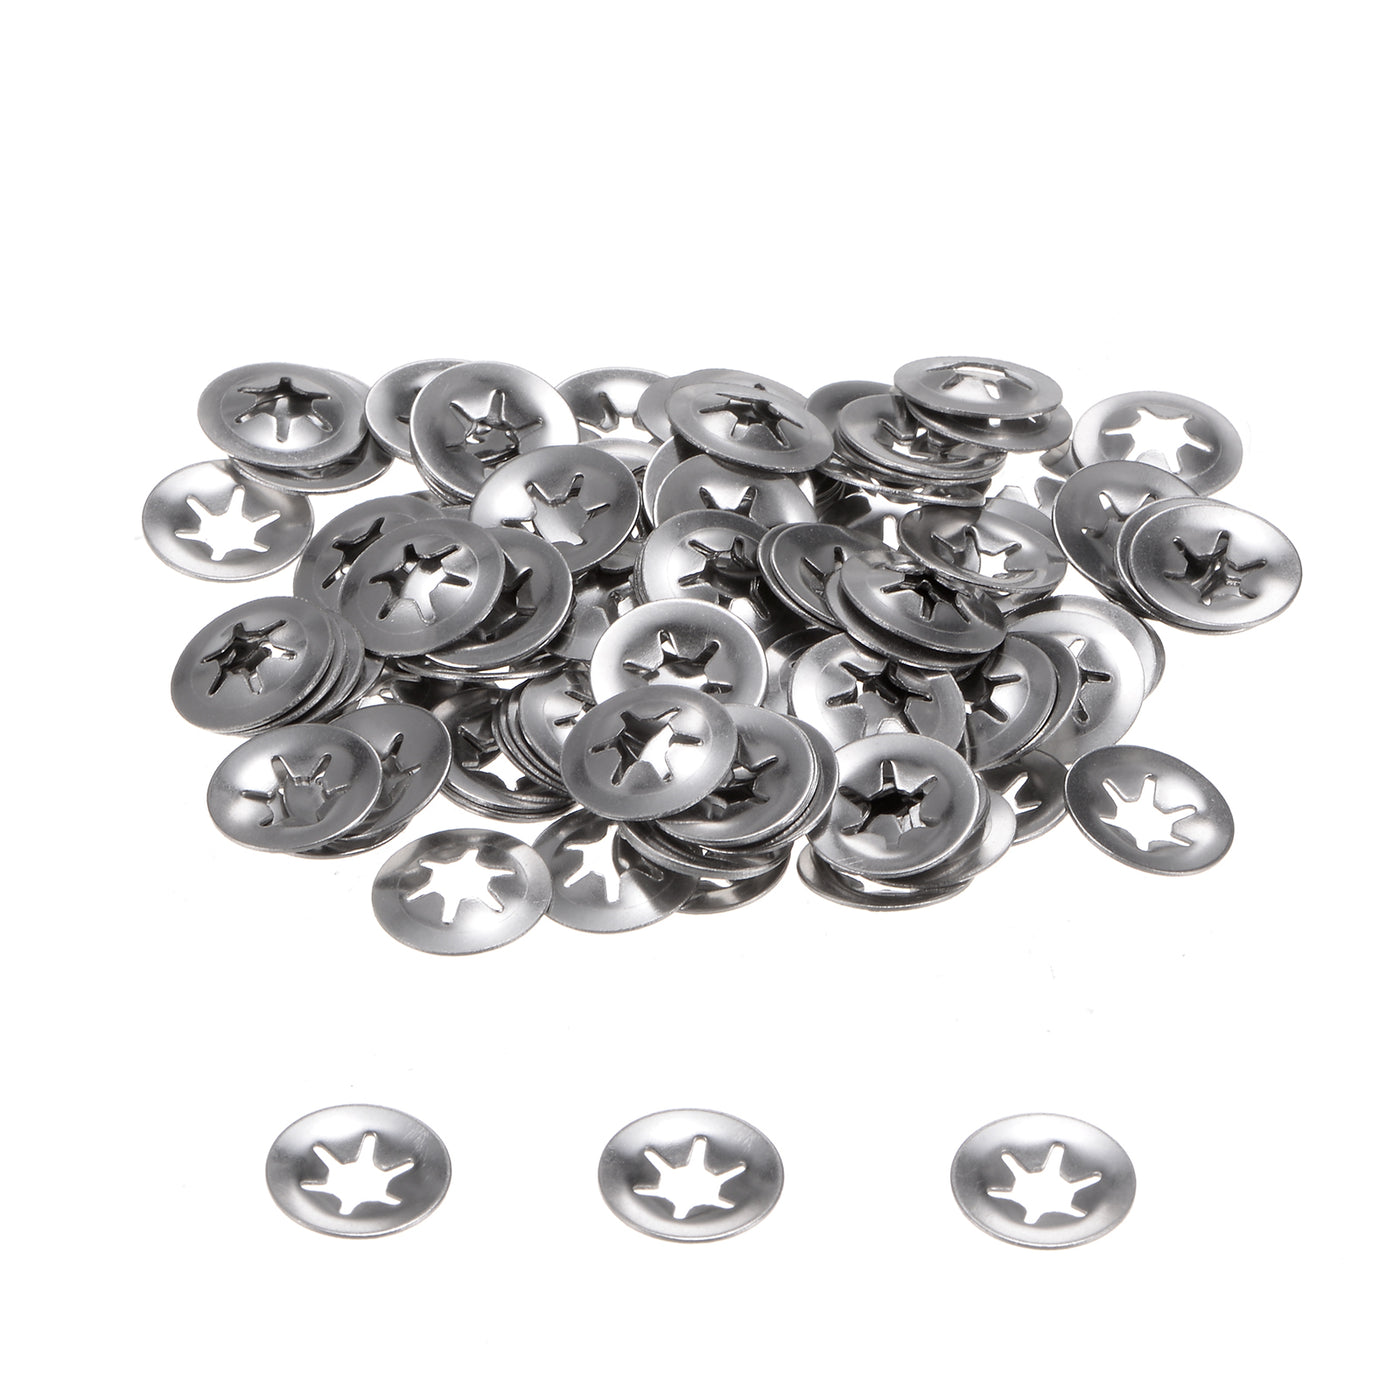 uxcell Uxcell 120pcs Internal Tooth Star Lock Washers M4 Stainless Steel Starlock Push Nuts